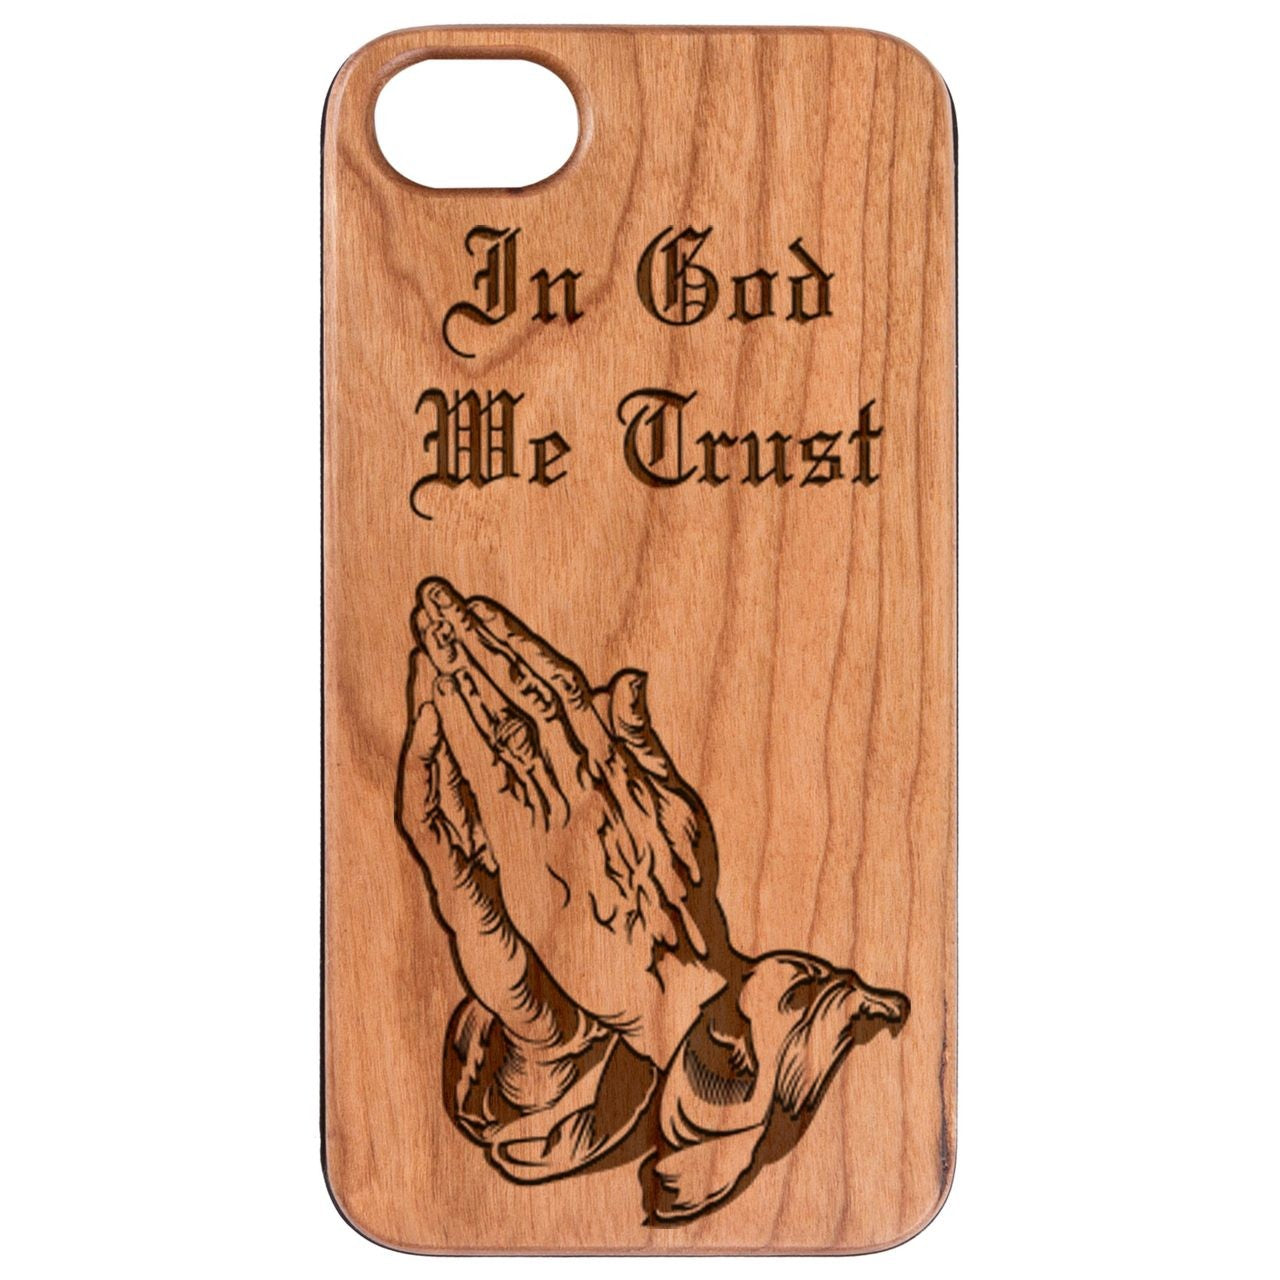  In God We Trust - Engraved - Wooden Phone Case - IPhone 13 Models